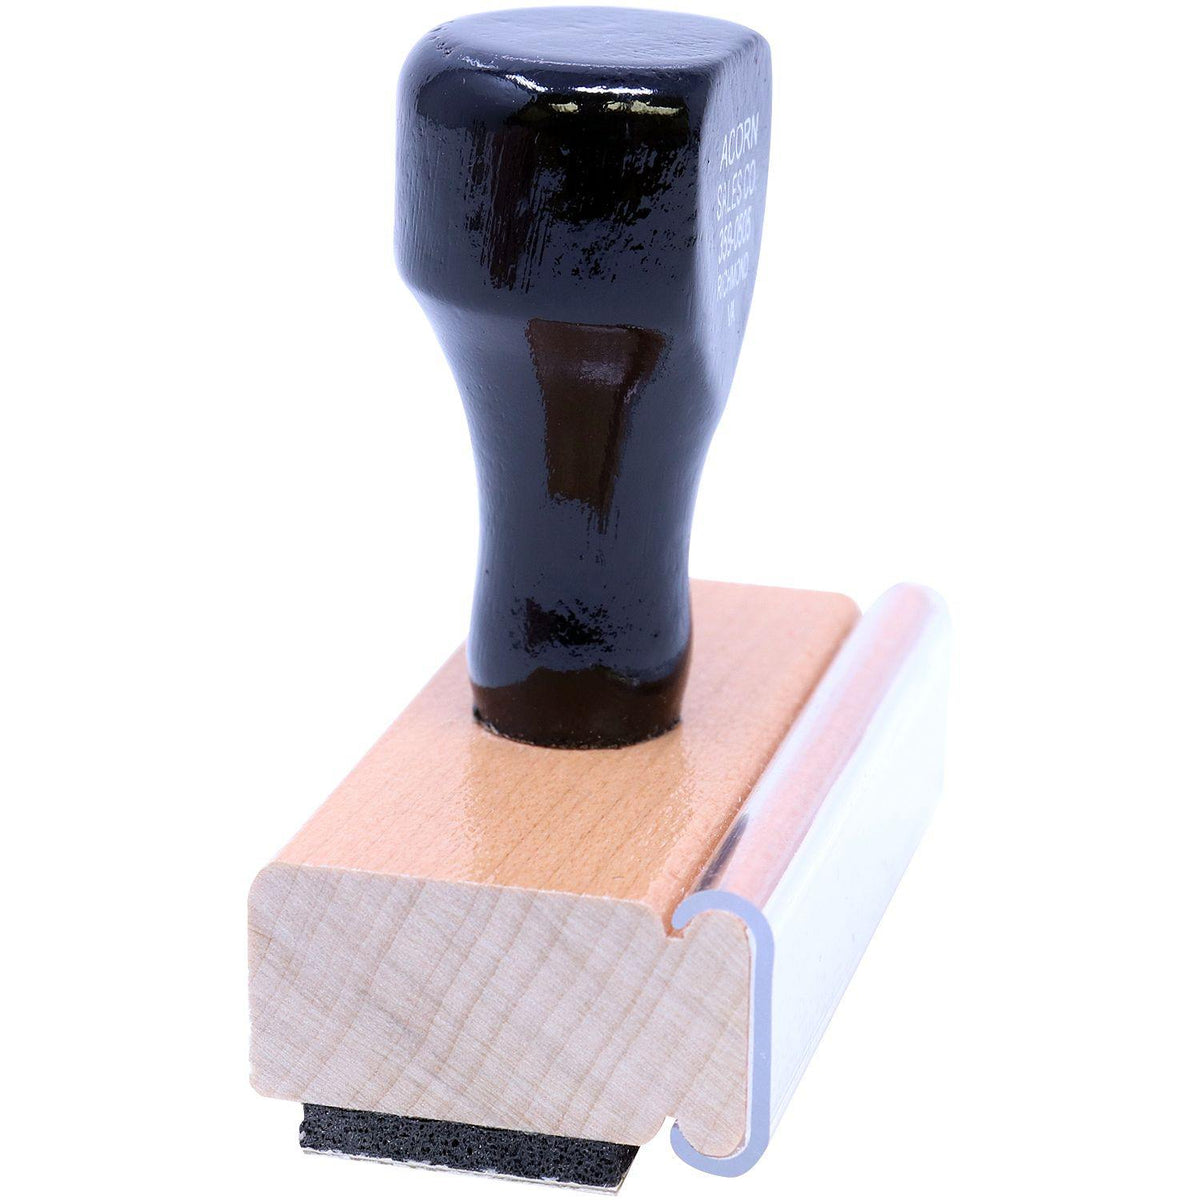 Side View of Large Improving with Chart Icon Rubber Stamp at an Angle